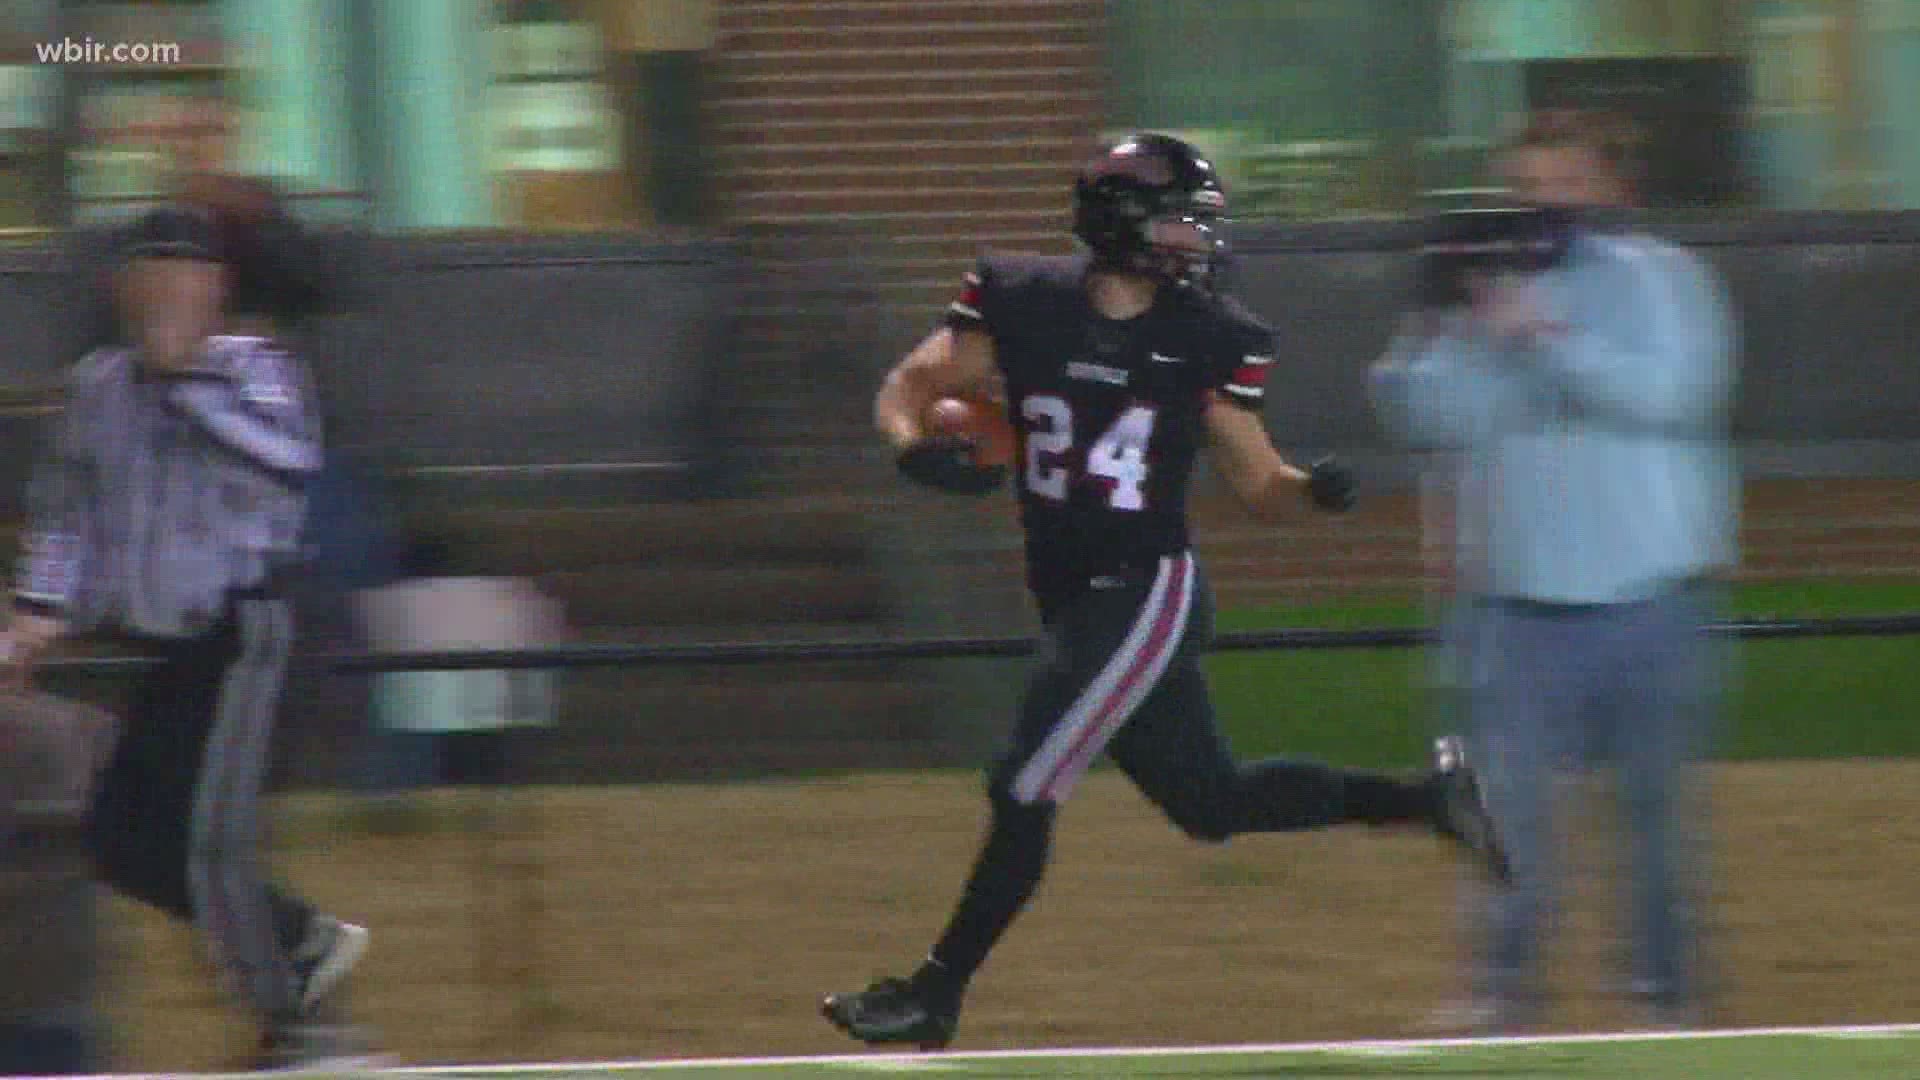 Maryville hangs on to beat Dobyns-Bennett at home in the quarterfinals.